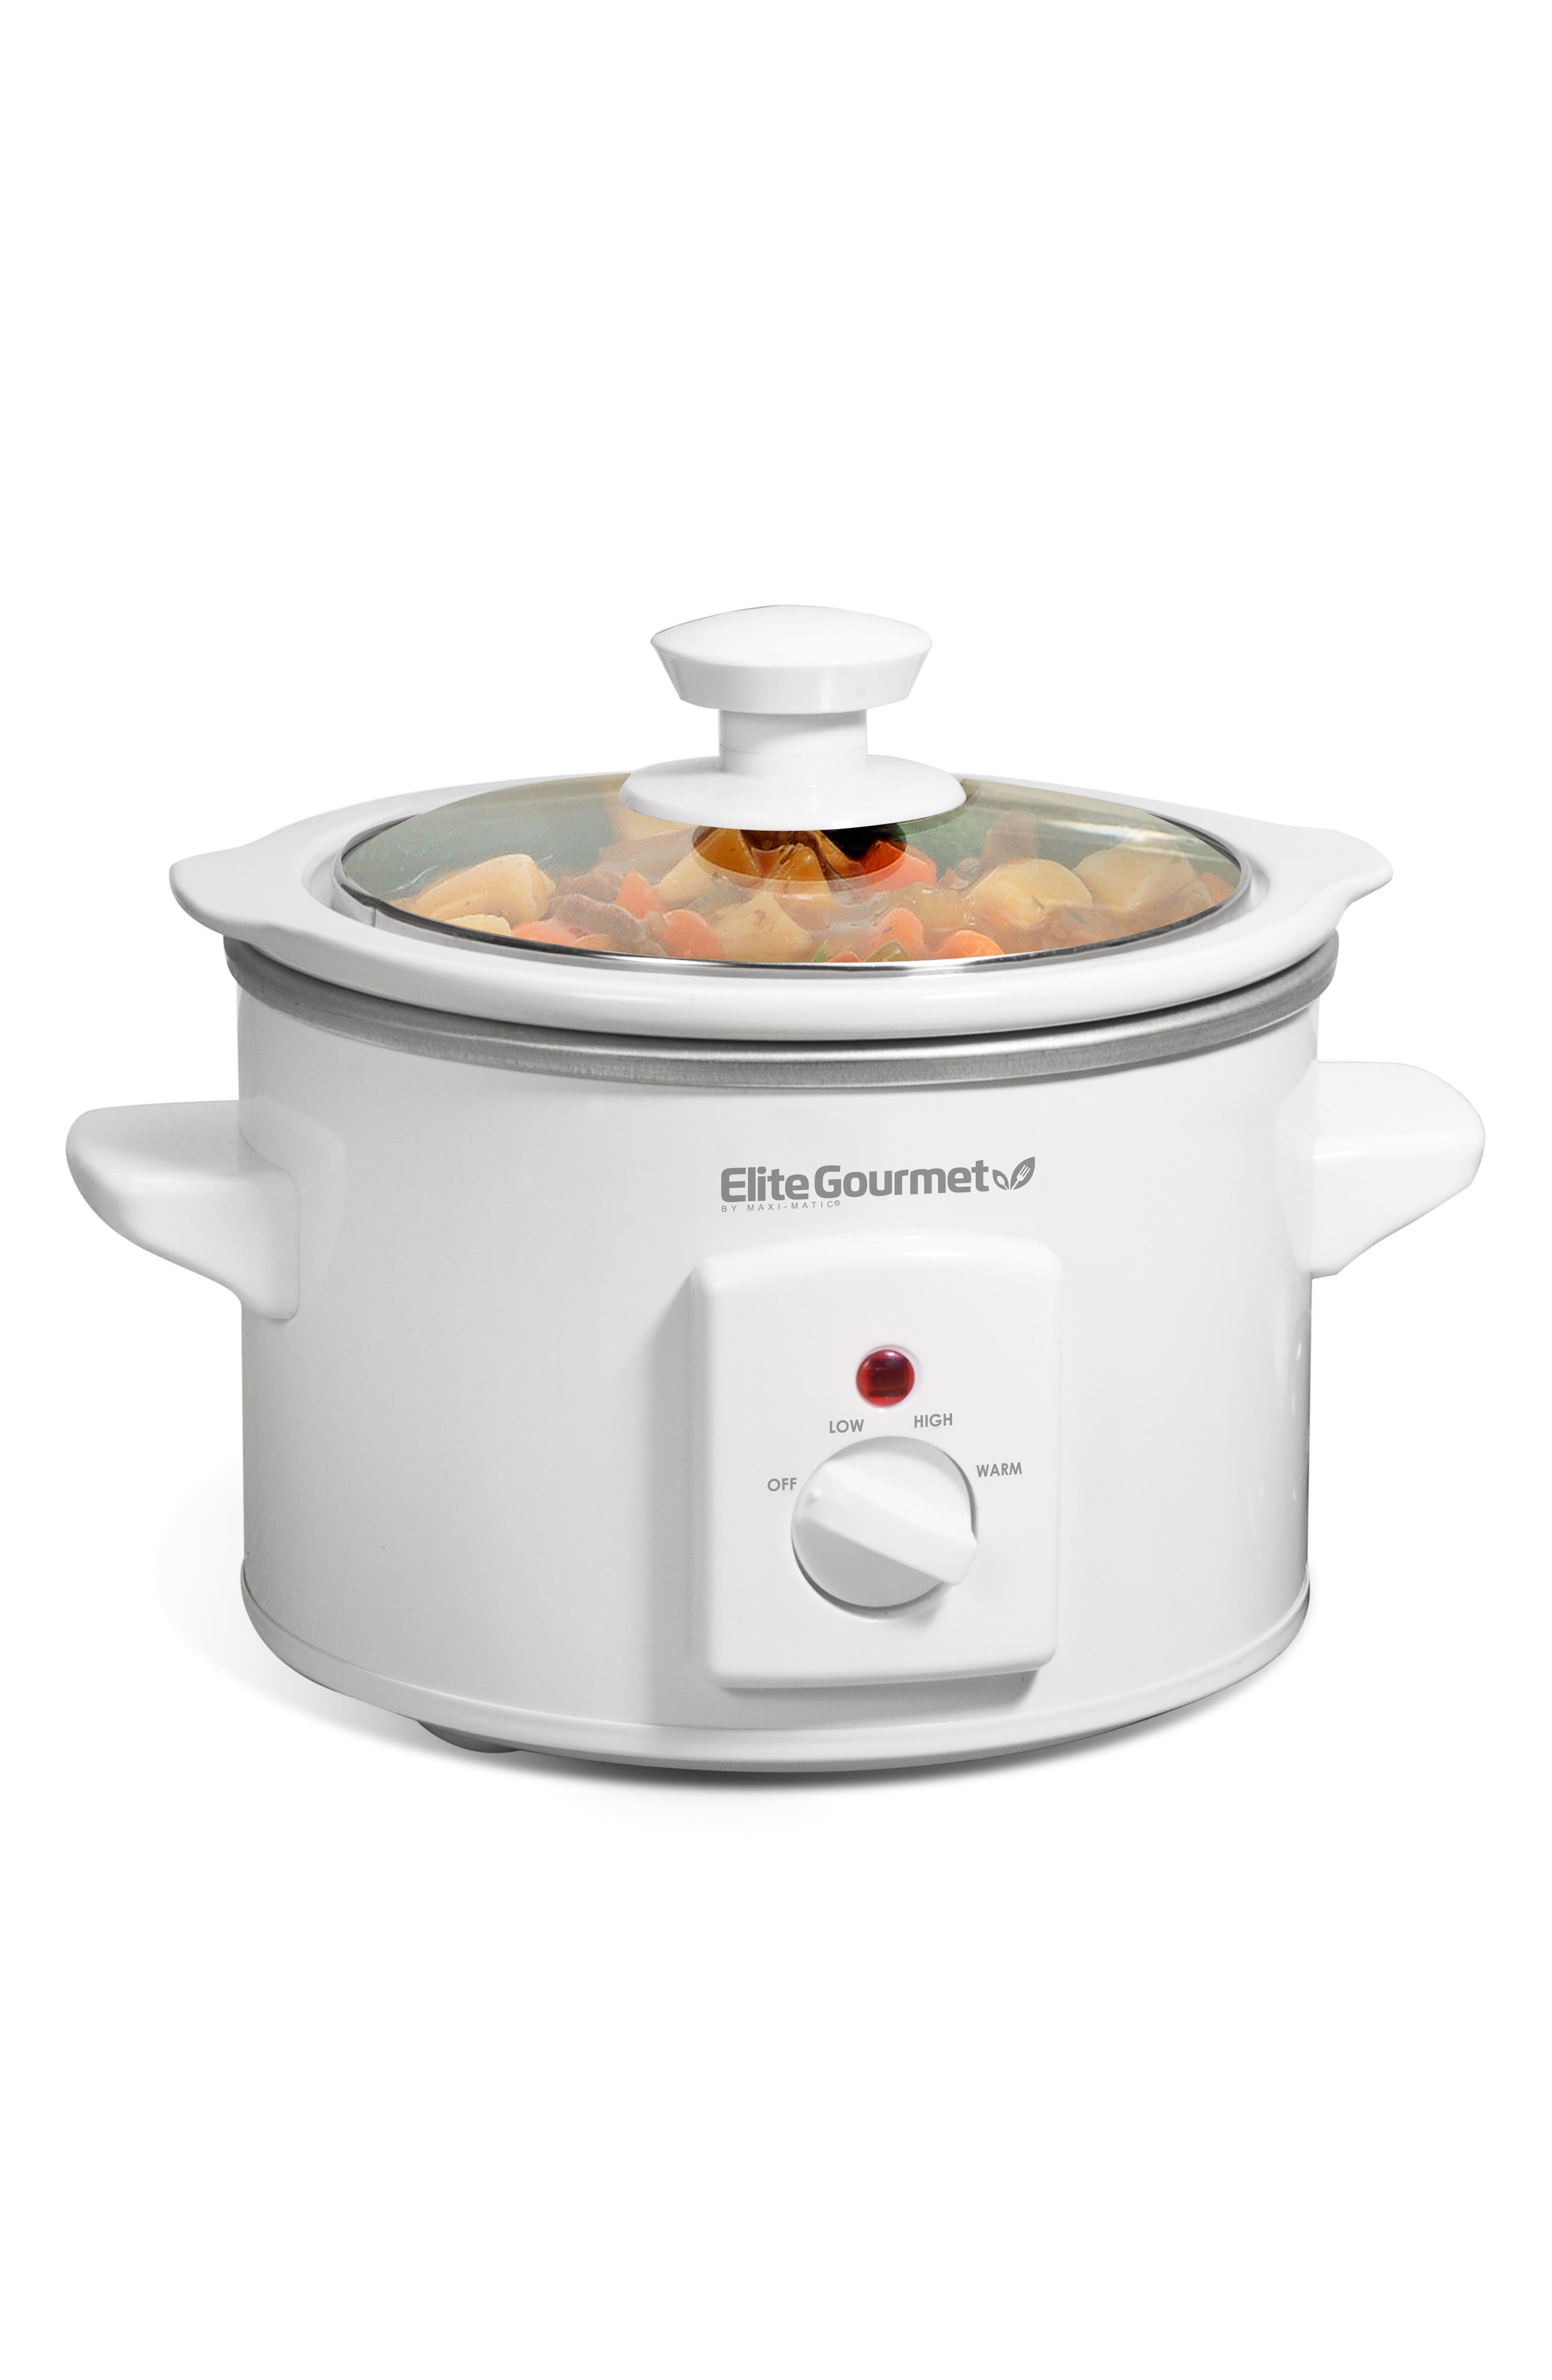 Maxi-matic Elite Cuisine Mst-250xw Mini Slow Cooker 1.5qt One Pot Meal In White